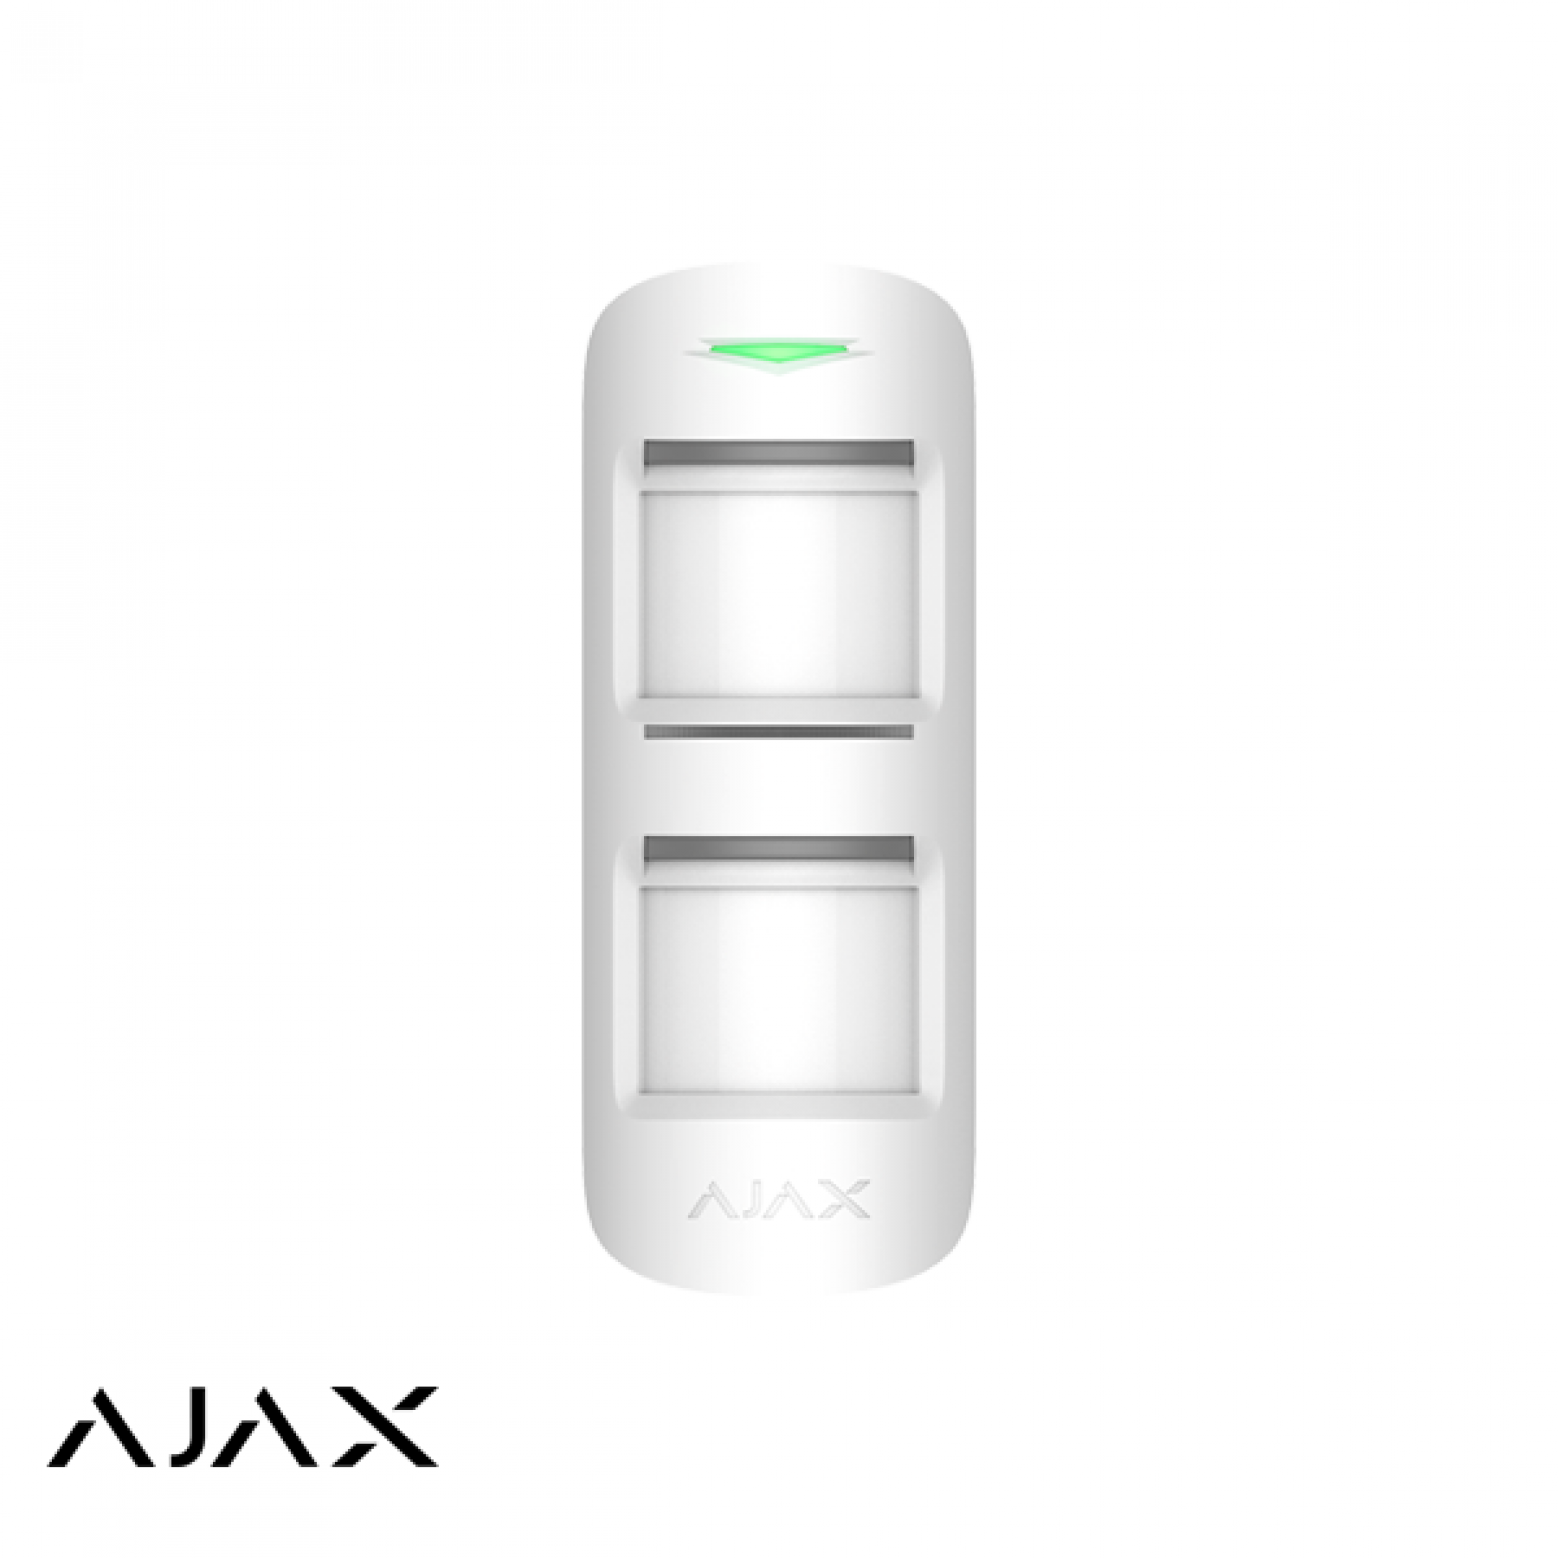 AJAX MotionProtect Outdoor Motion Detector Wireless